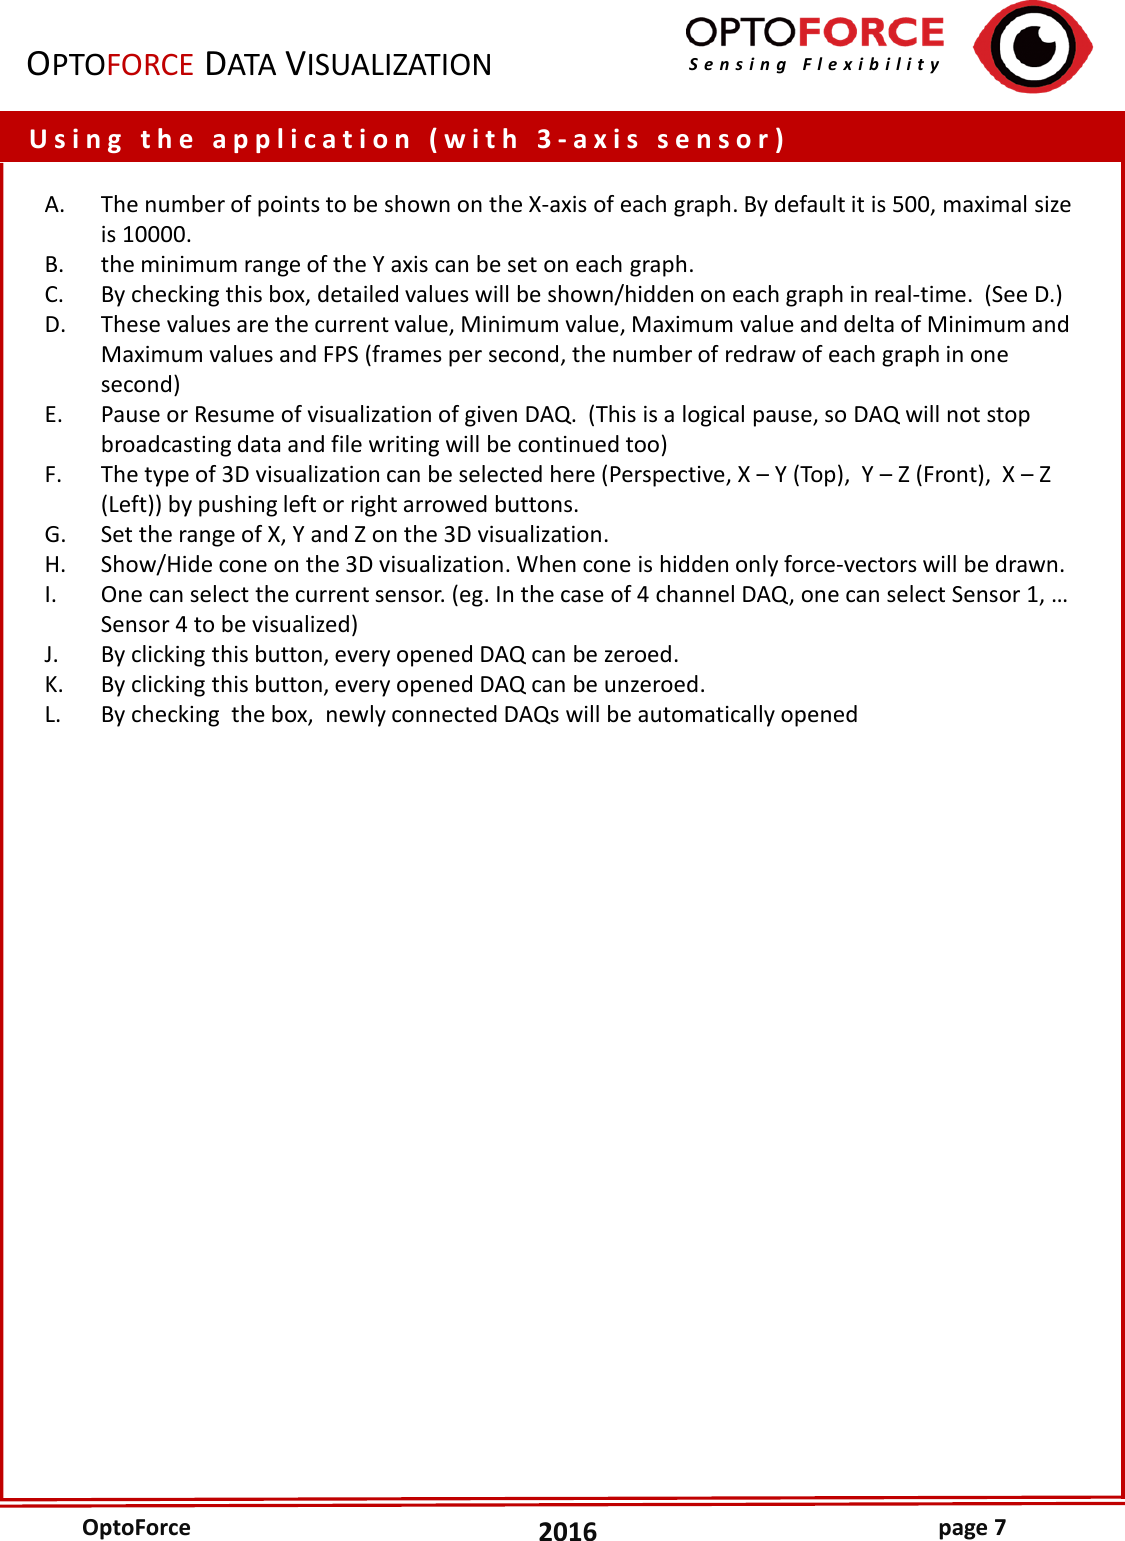 Page 7 of 12 - ODV User Guide ODV2